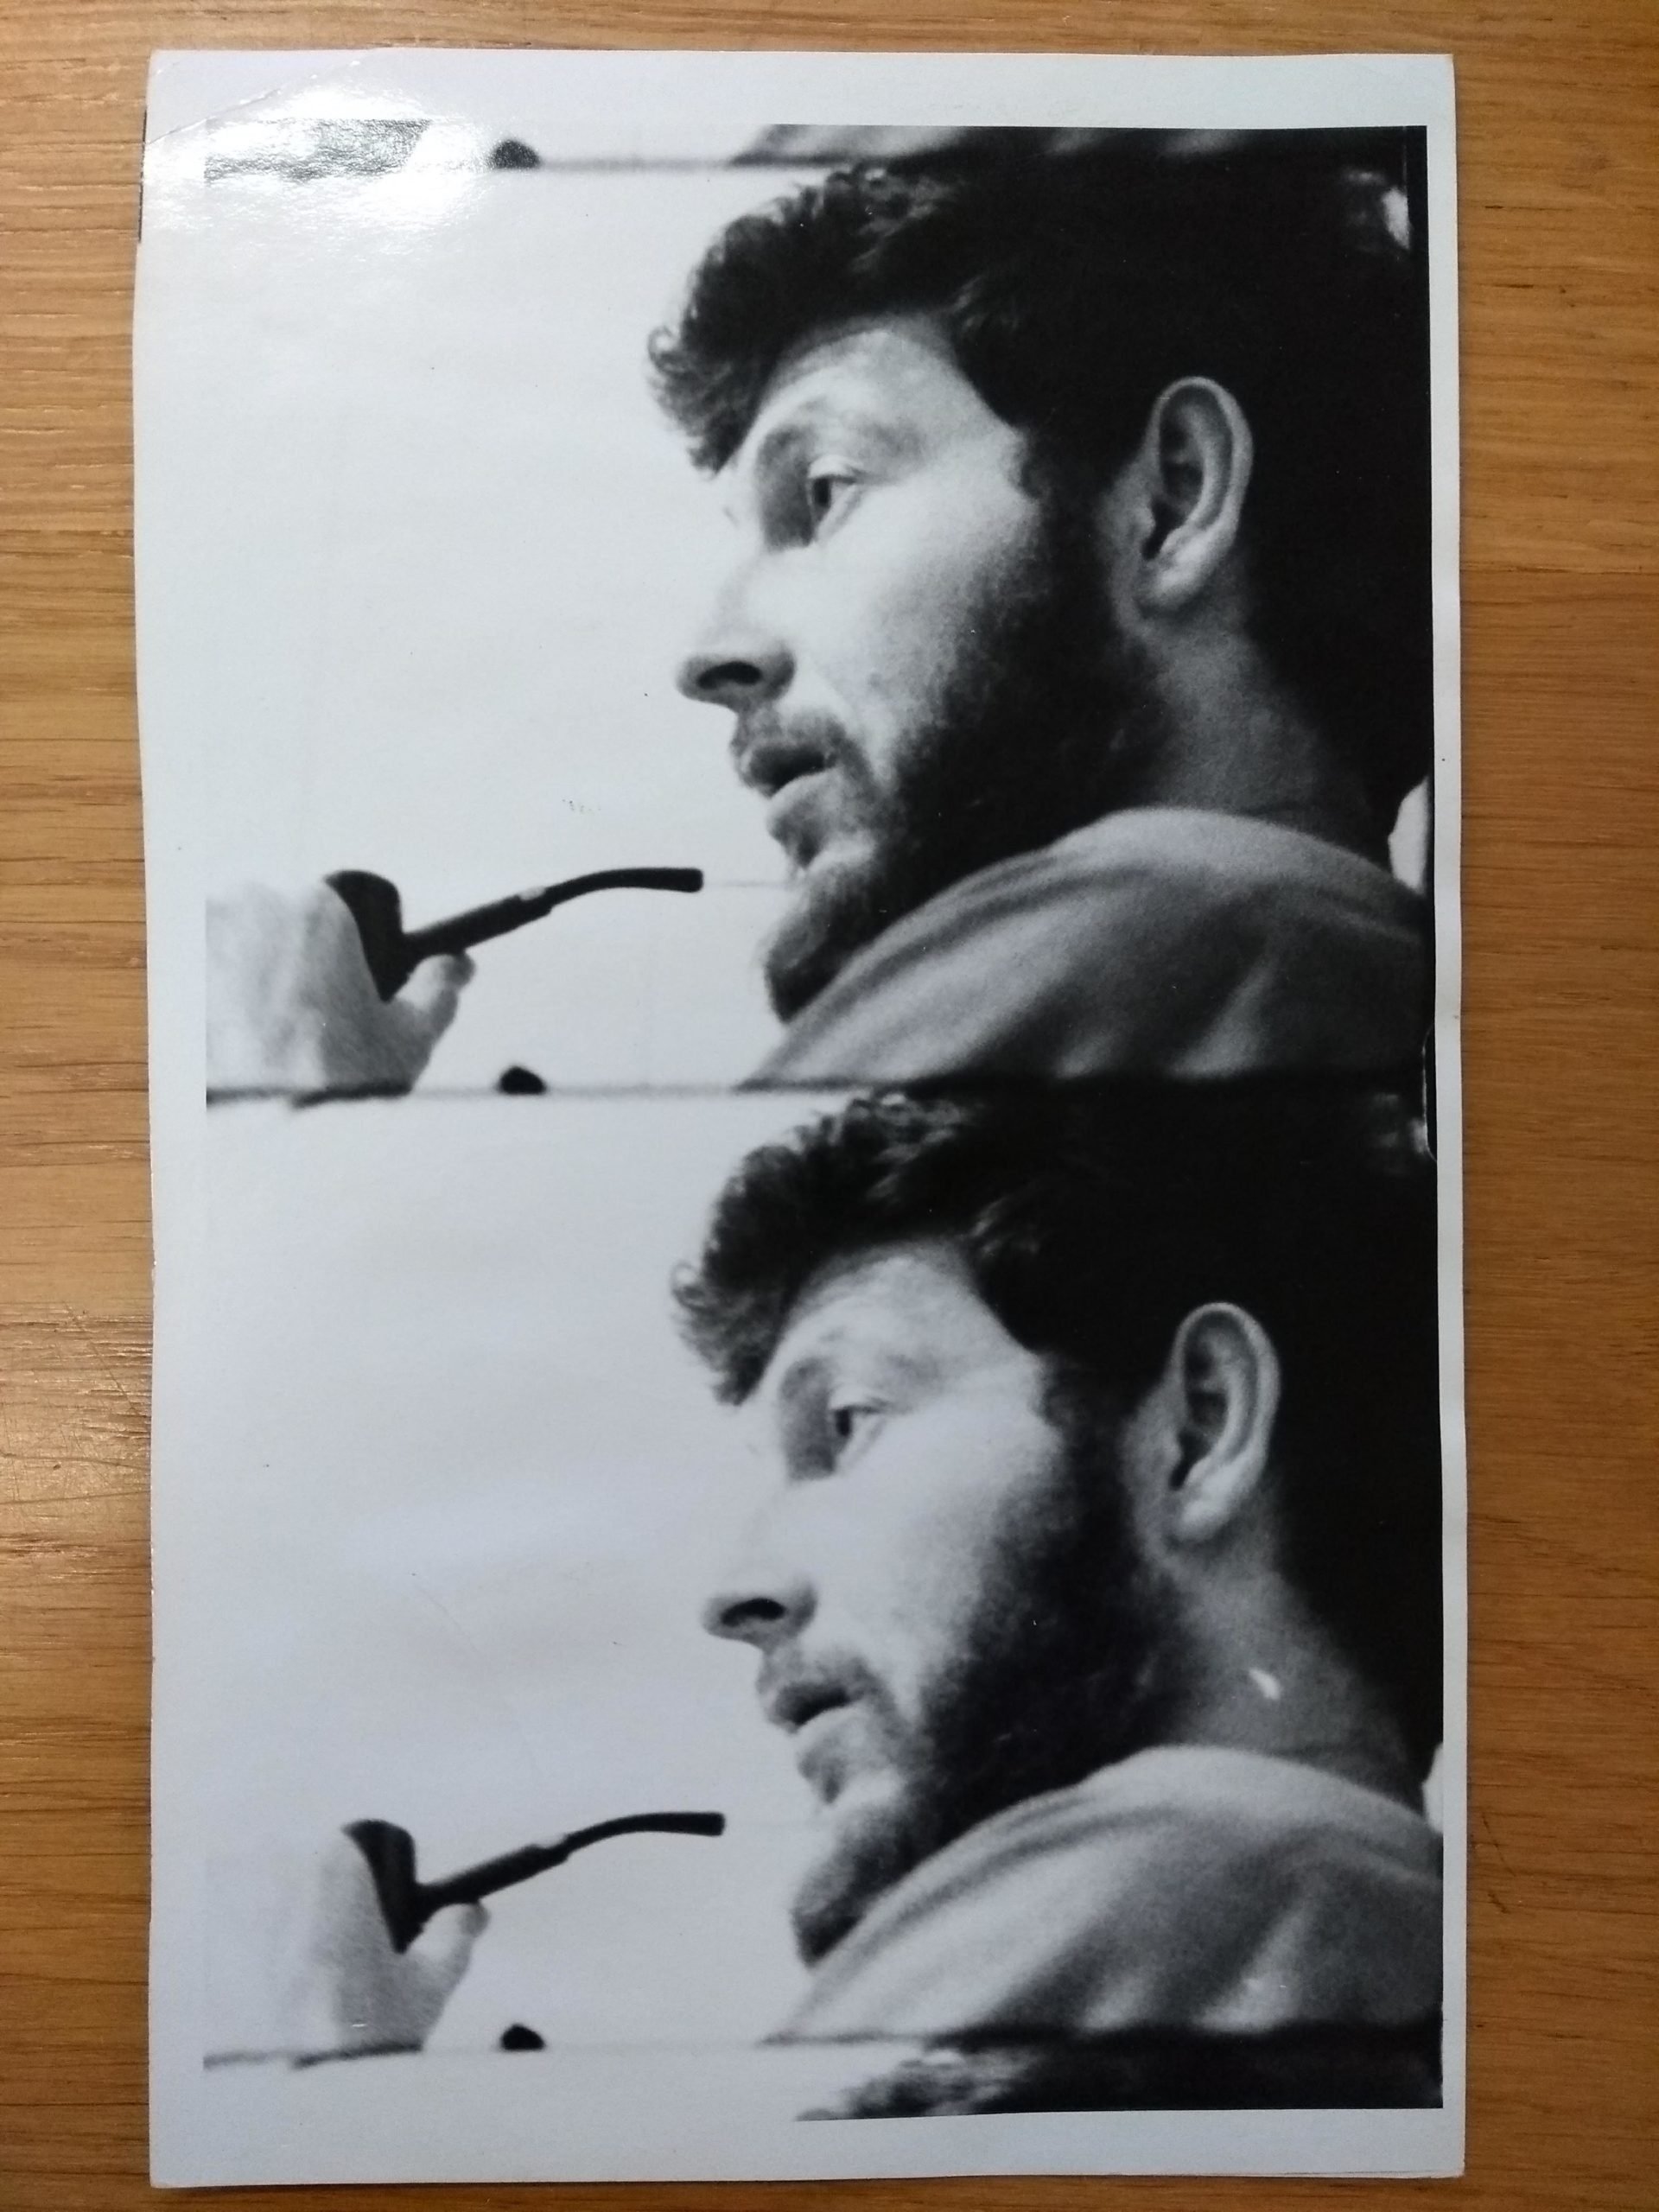 A B&W split-frame photograph of a white bearded man’s profile. He is holding a pipe close to his mouth. The same image in each frame. 